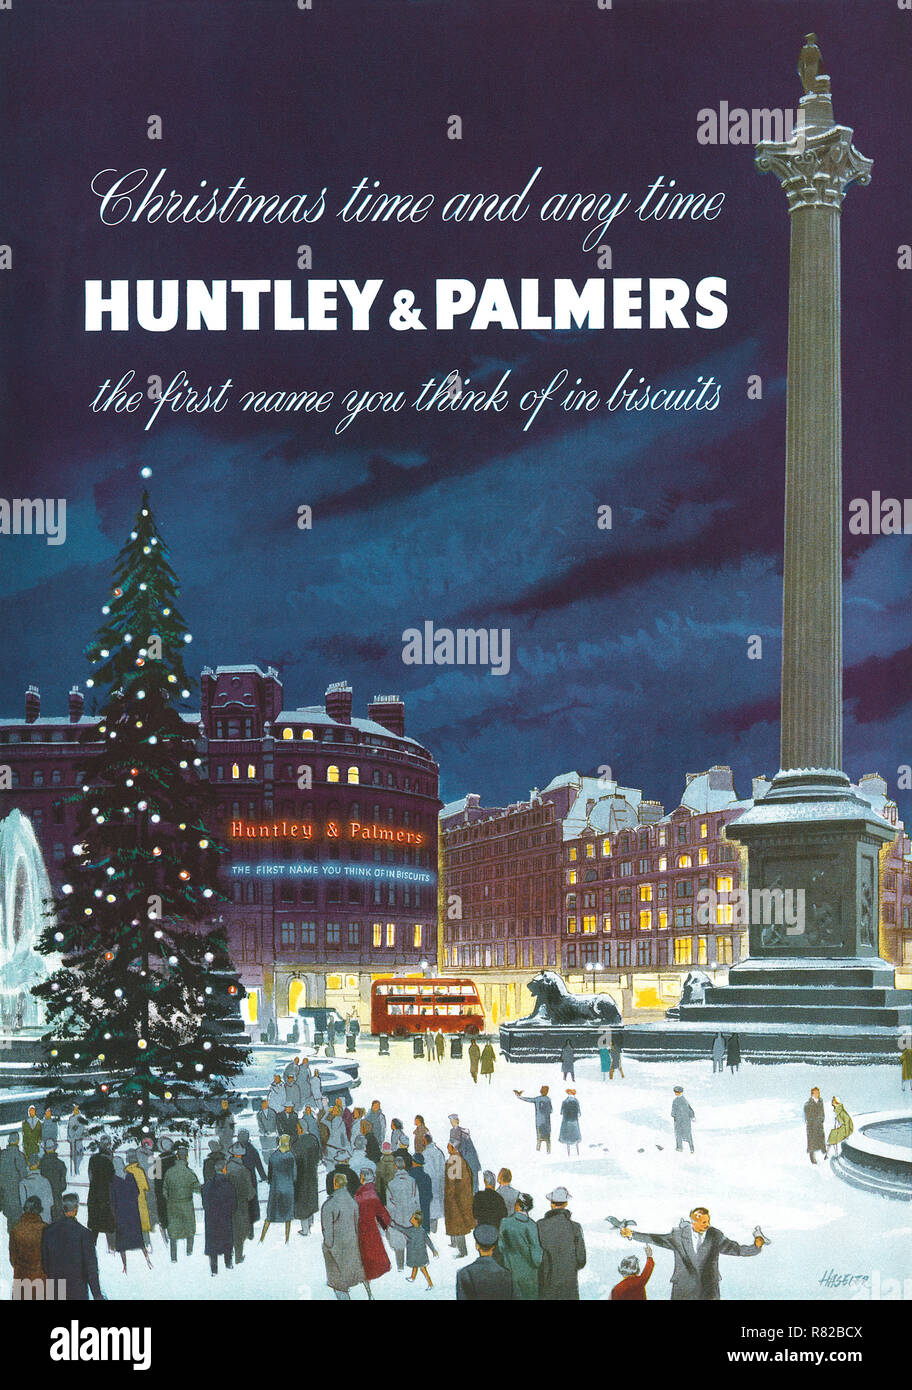 1955 British Christmas advertisement for Huntley & Palmers biscuits. Stock Photo